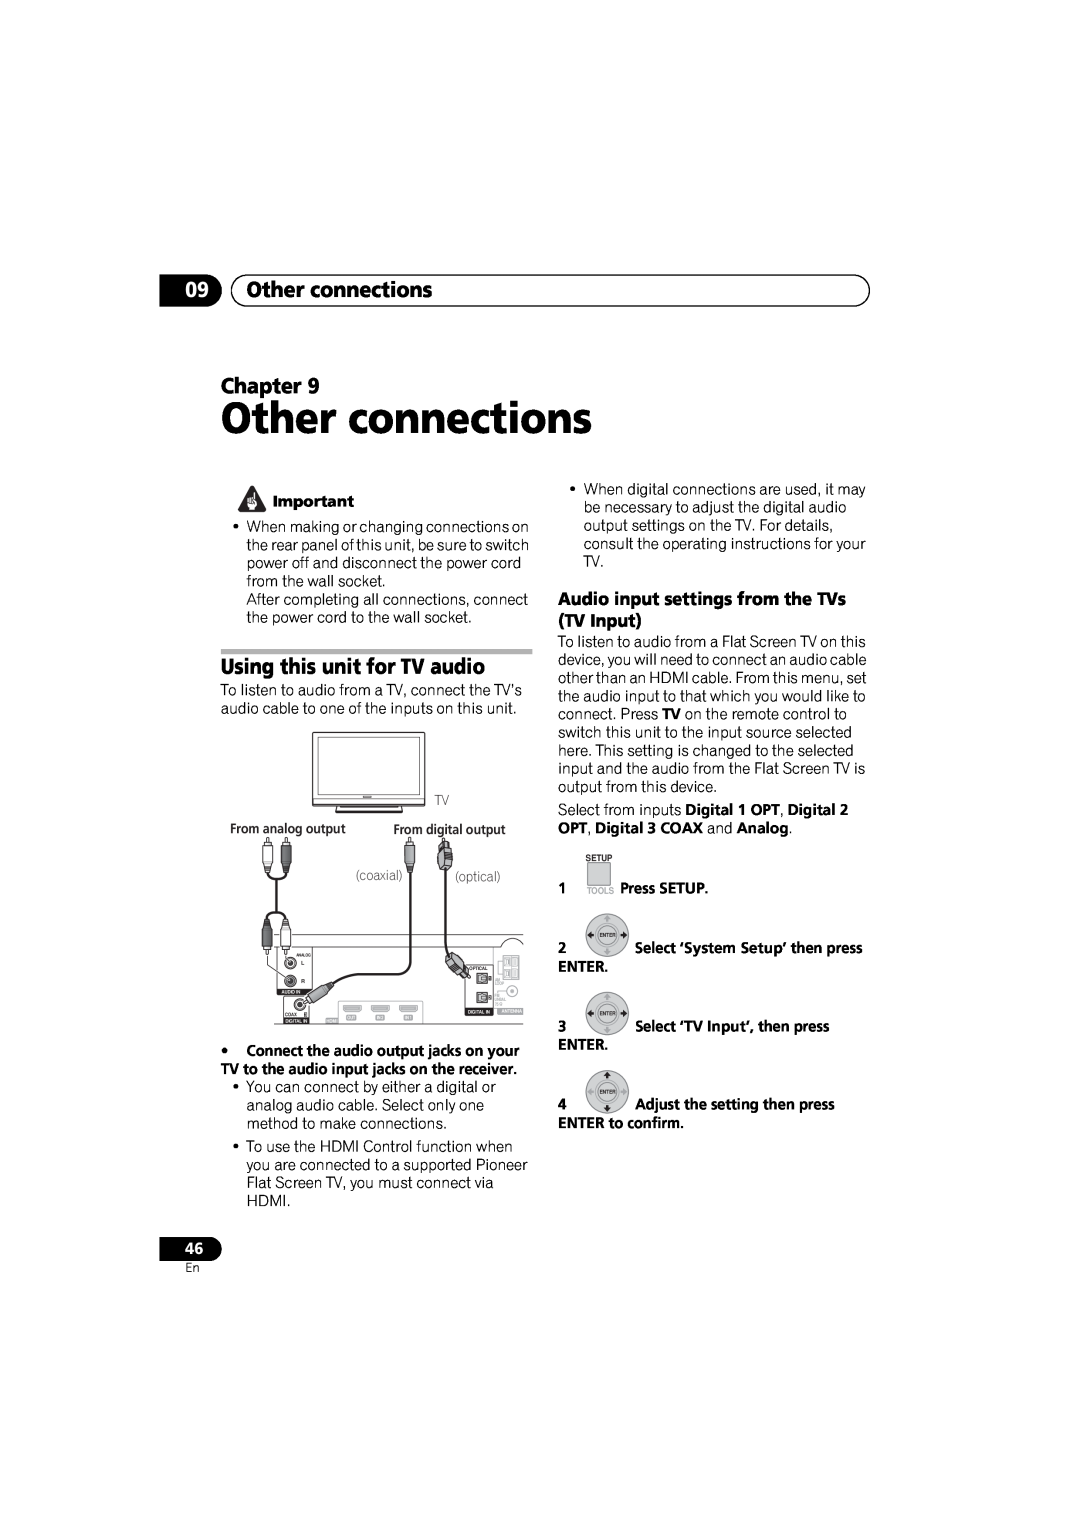 Pioneer SX-LX03 09Other connections Chapter, Using this unit for TV audio, Audio input settings from the TVs TV Input 